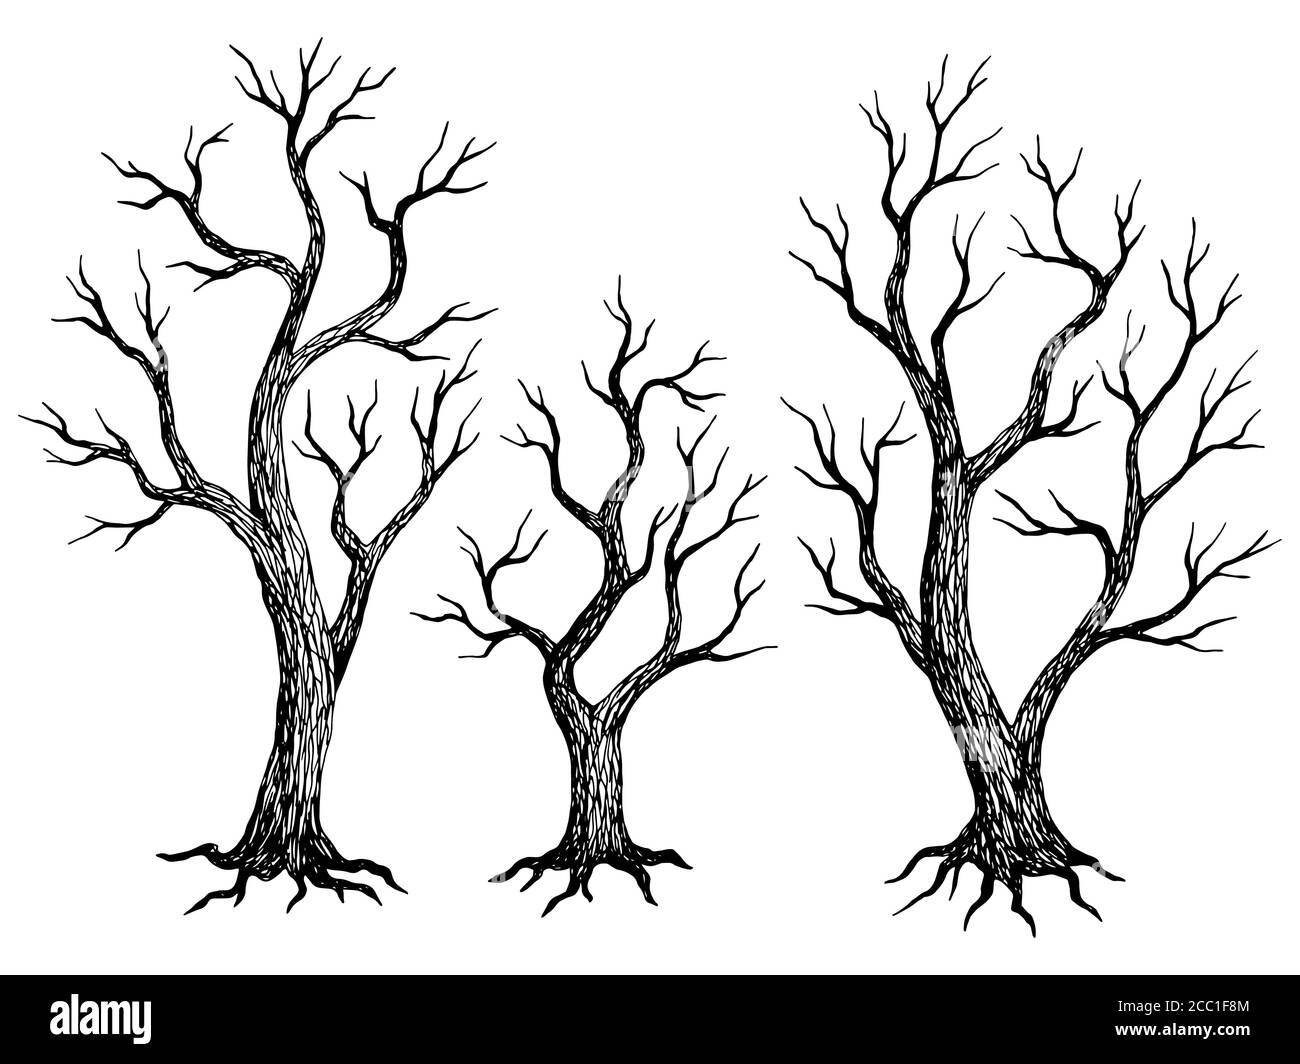 How to draw a tree (Without leaves) - Step by step - YouTube